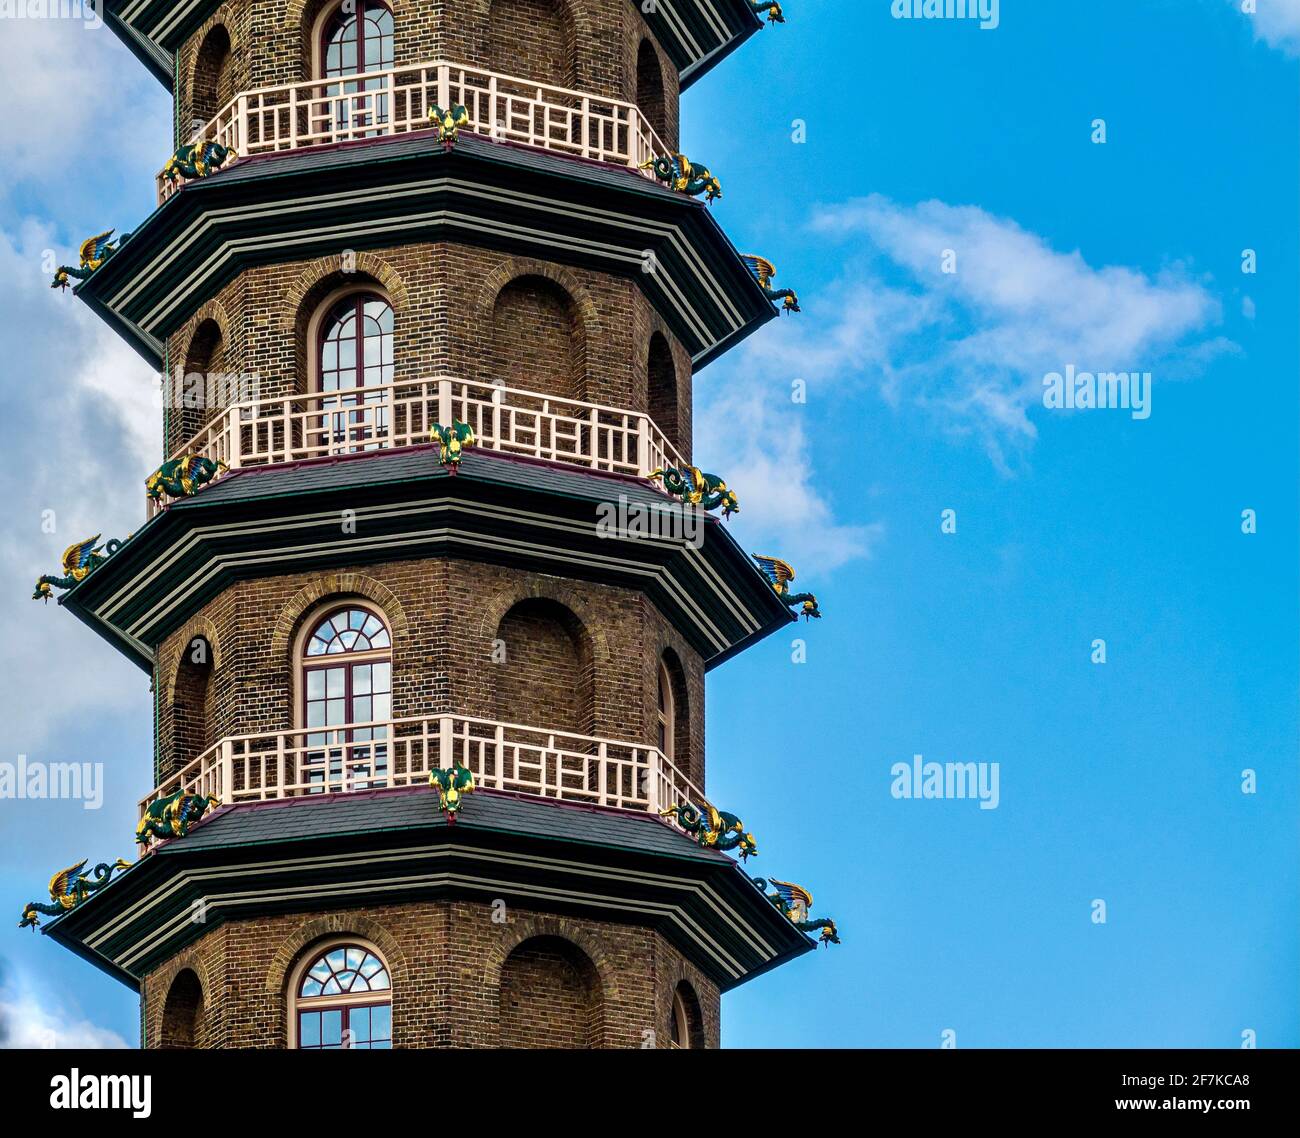 The Great Pagoda, a Chinese monument within Kew Gardens, London, designed by Sir William Chambers. Stock Photo